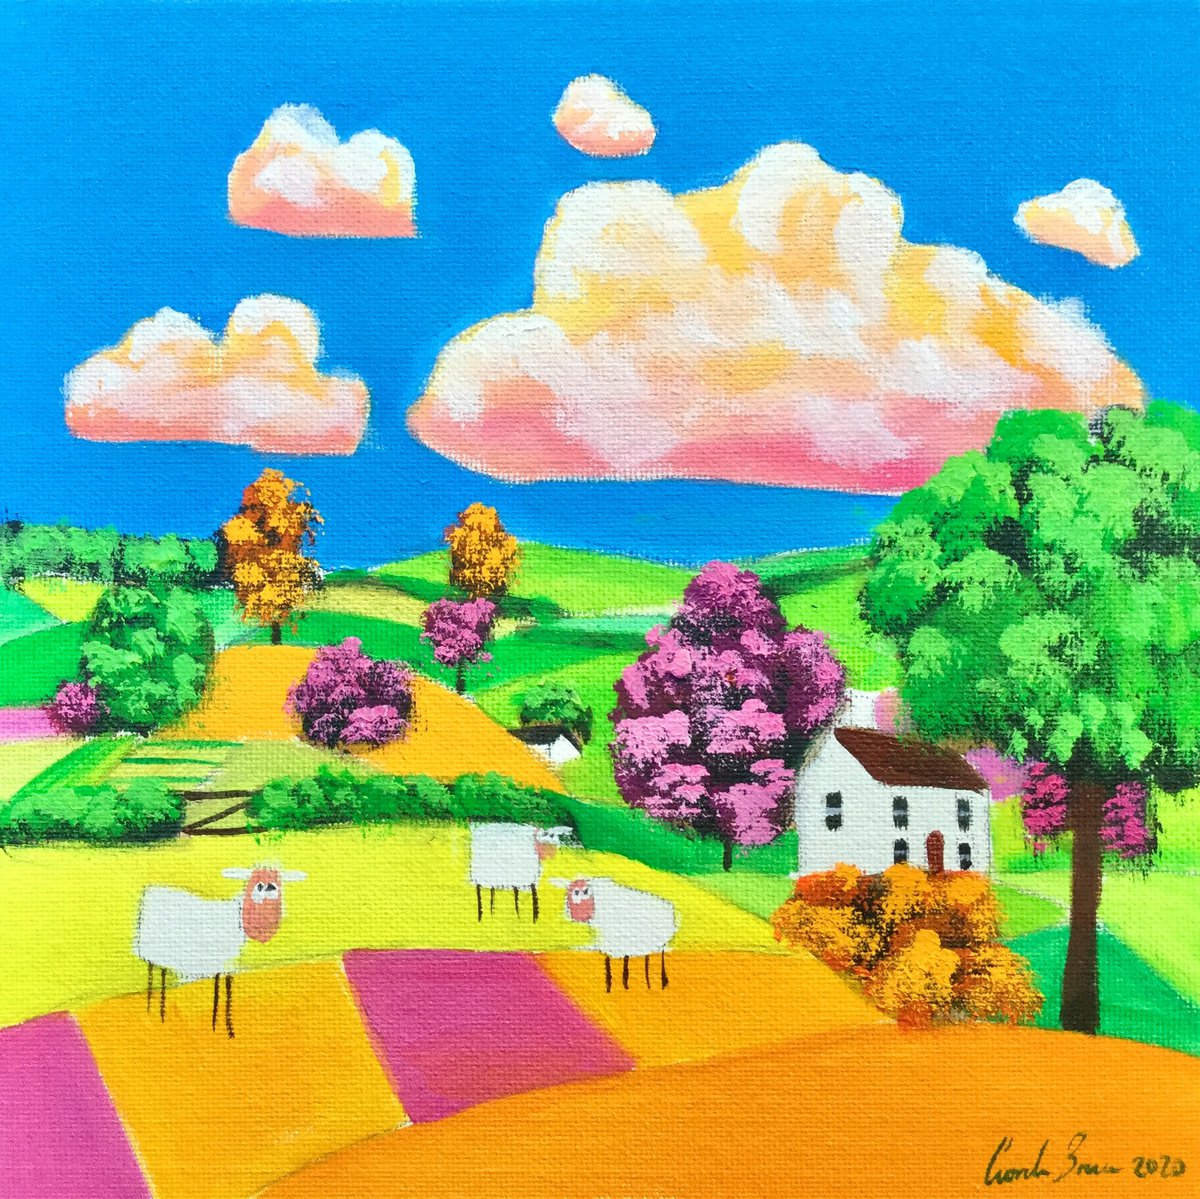 Sheep in the field by Gordon Bruce